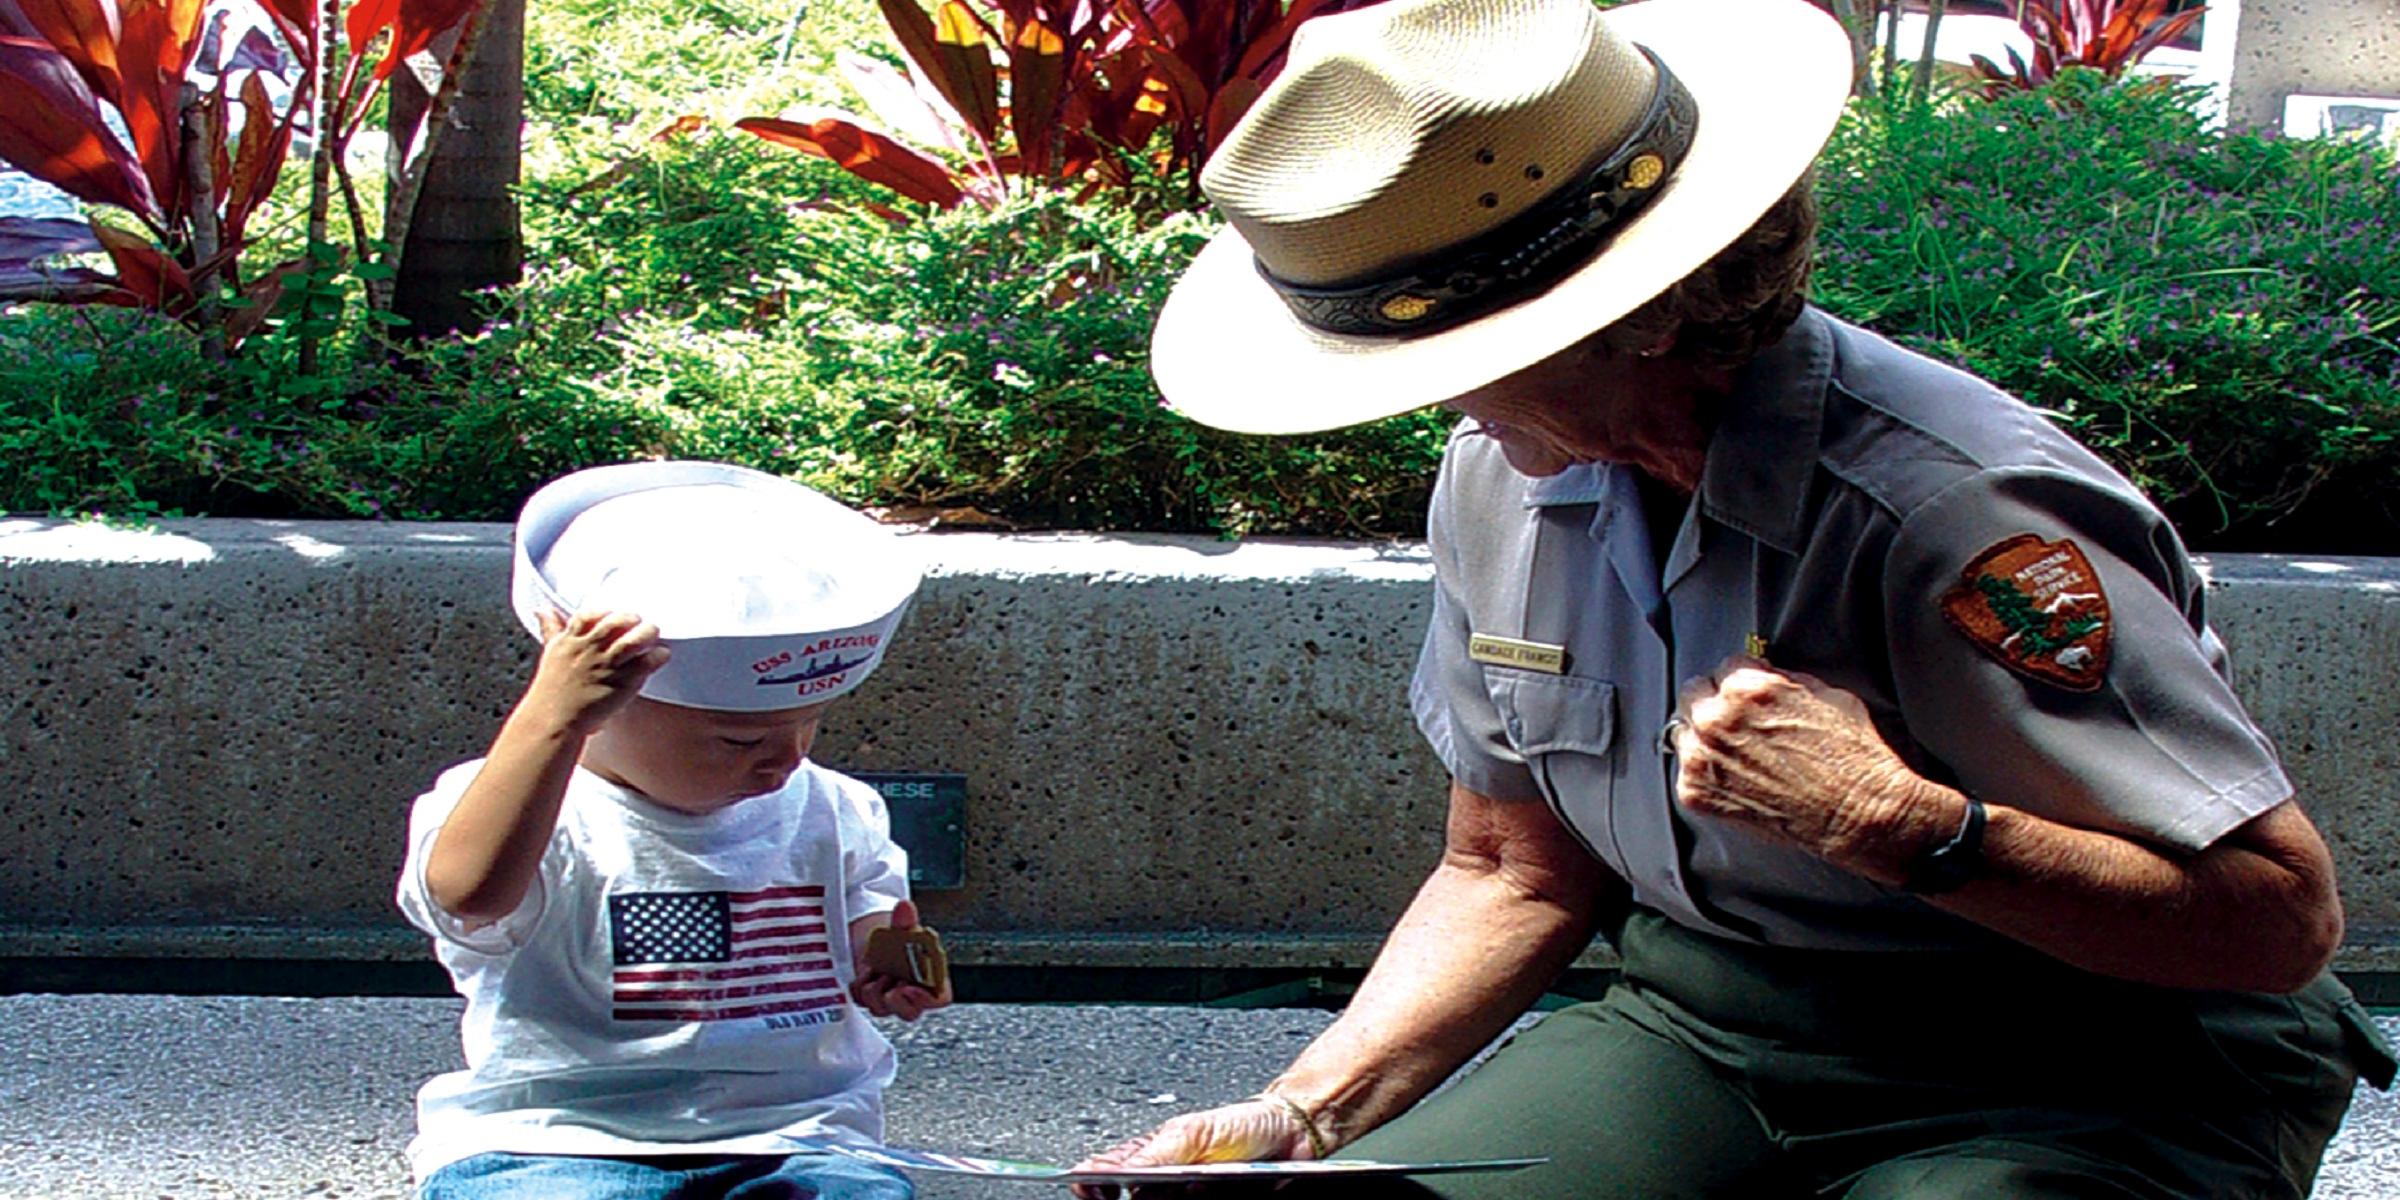 A park ranger speaking to a young visitor about the National Park